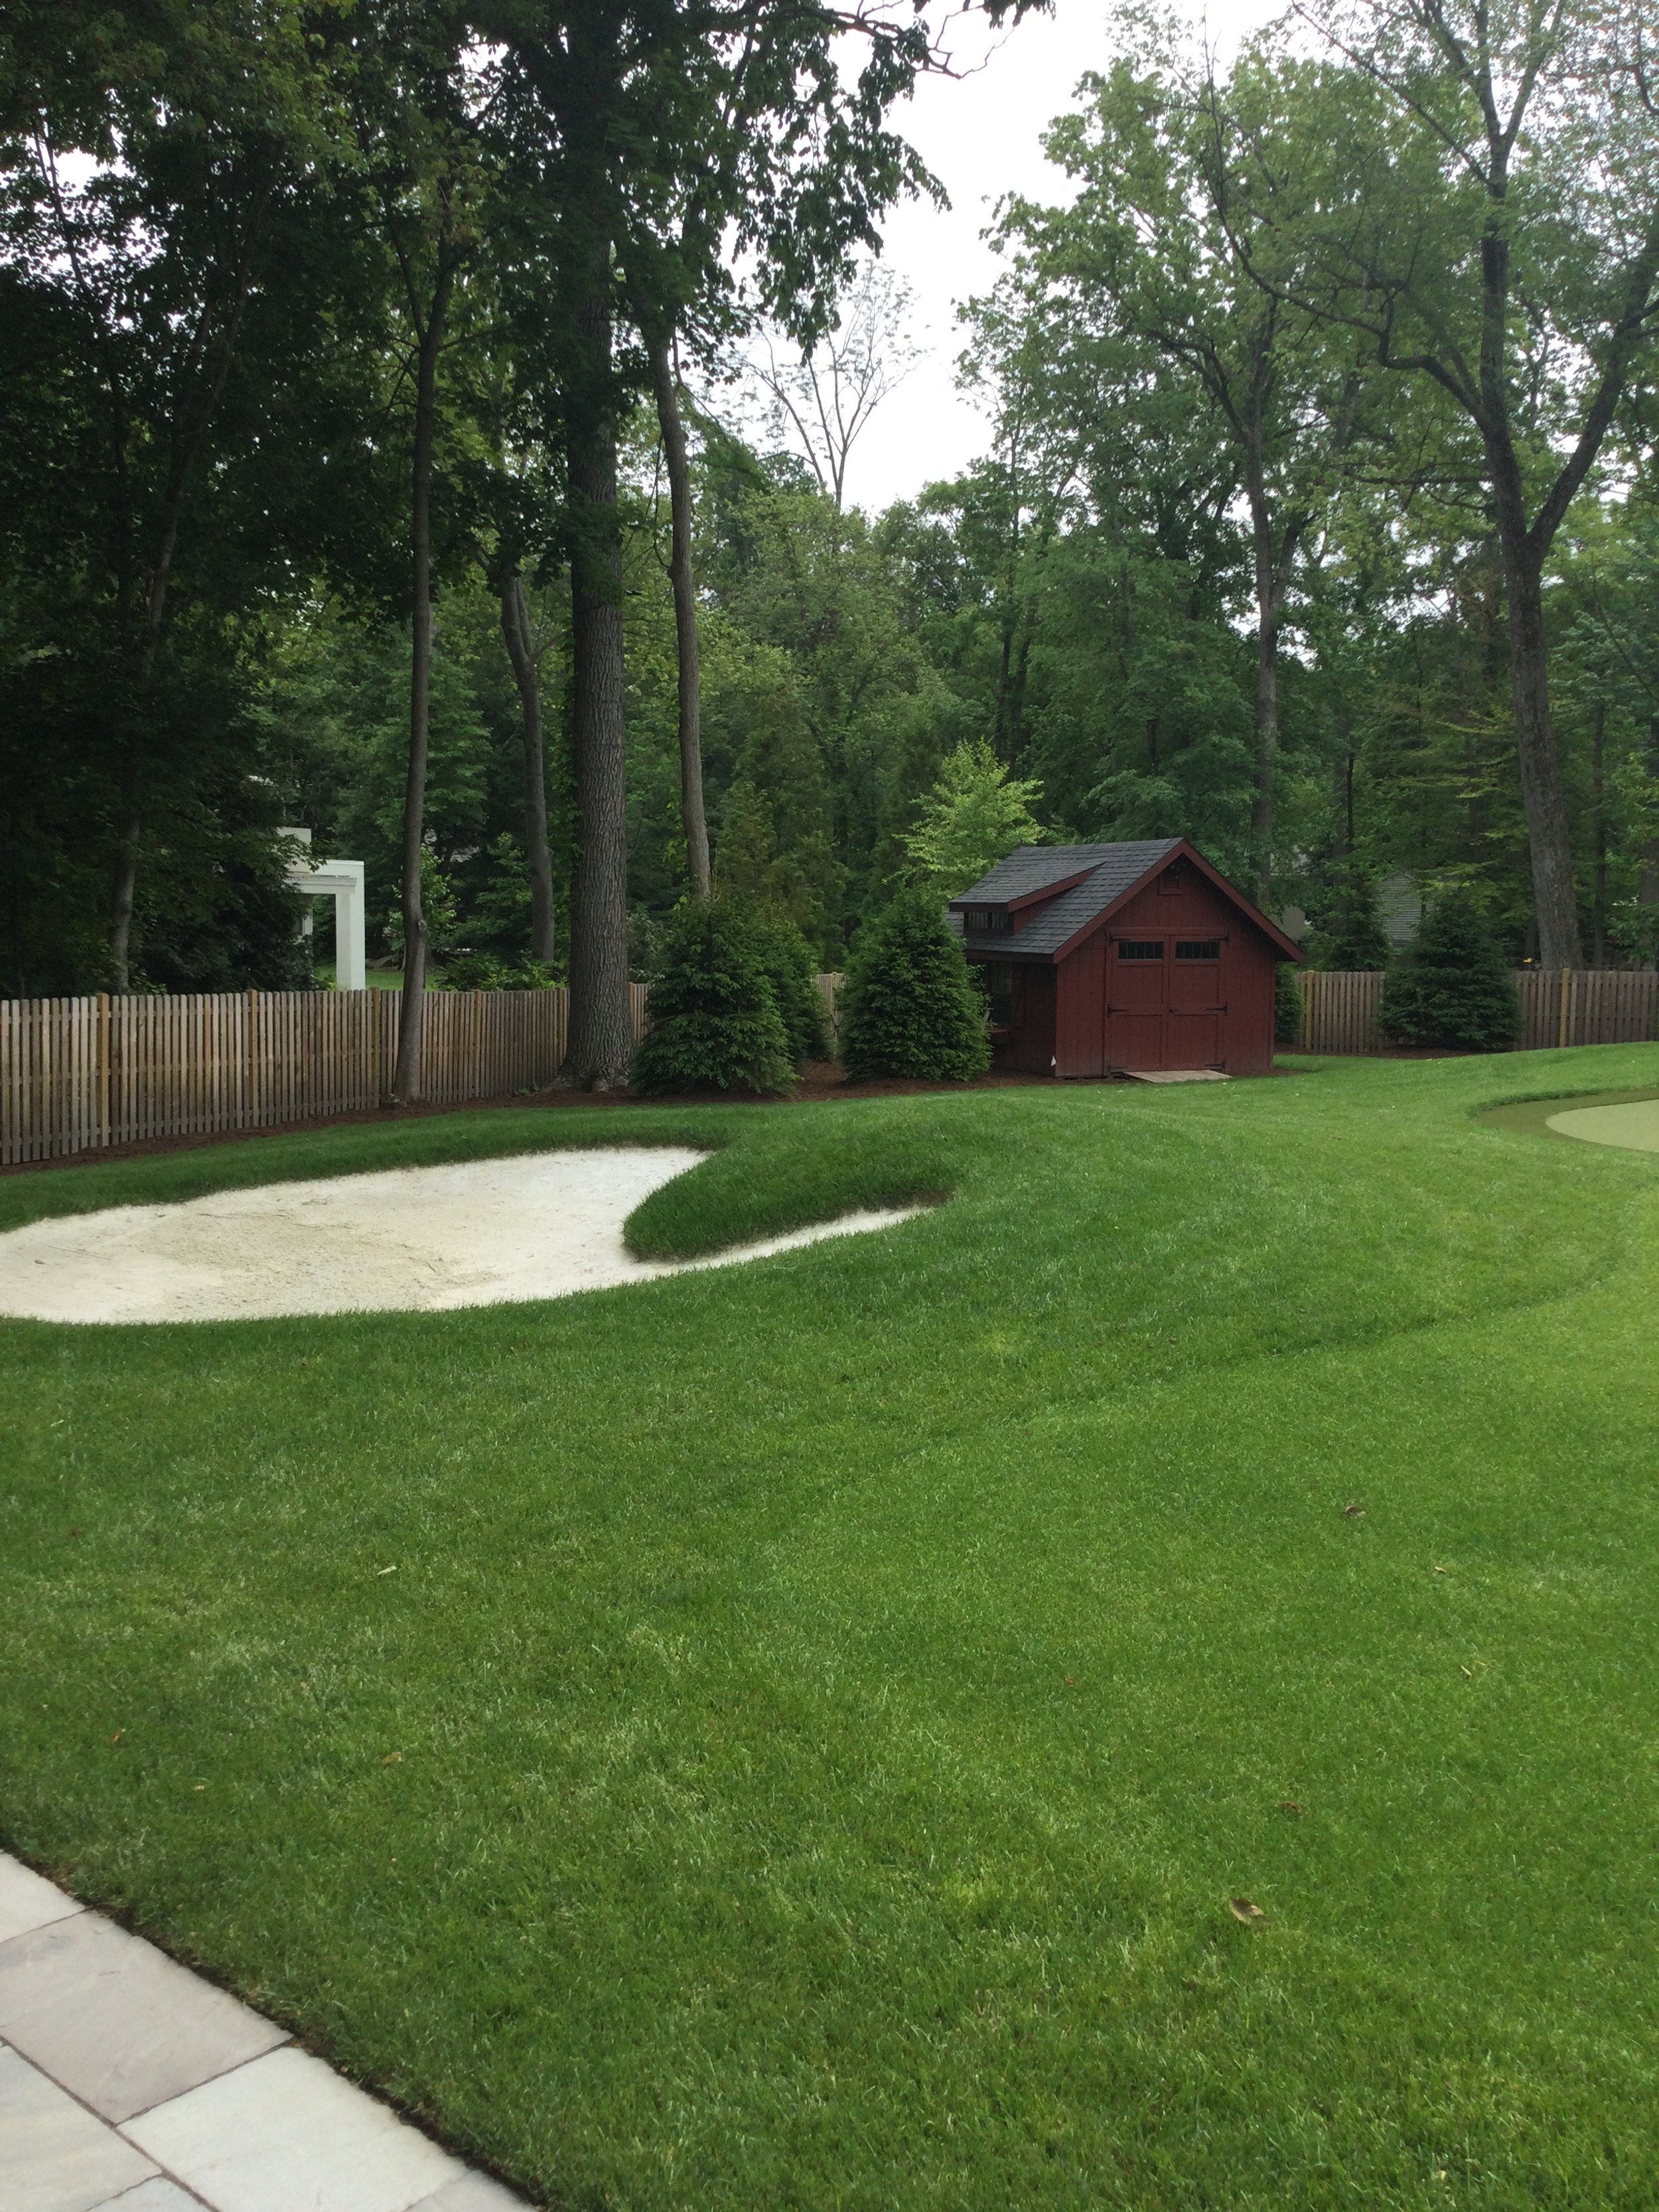 Grasskeepers Landscaping Builds Golf Holes and Sand Bunkers for Luxury Residential Homes in Bergen County, NJ